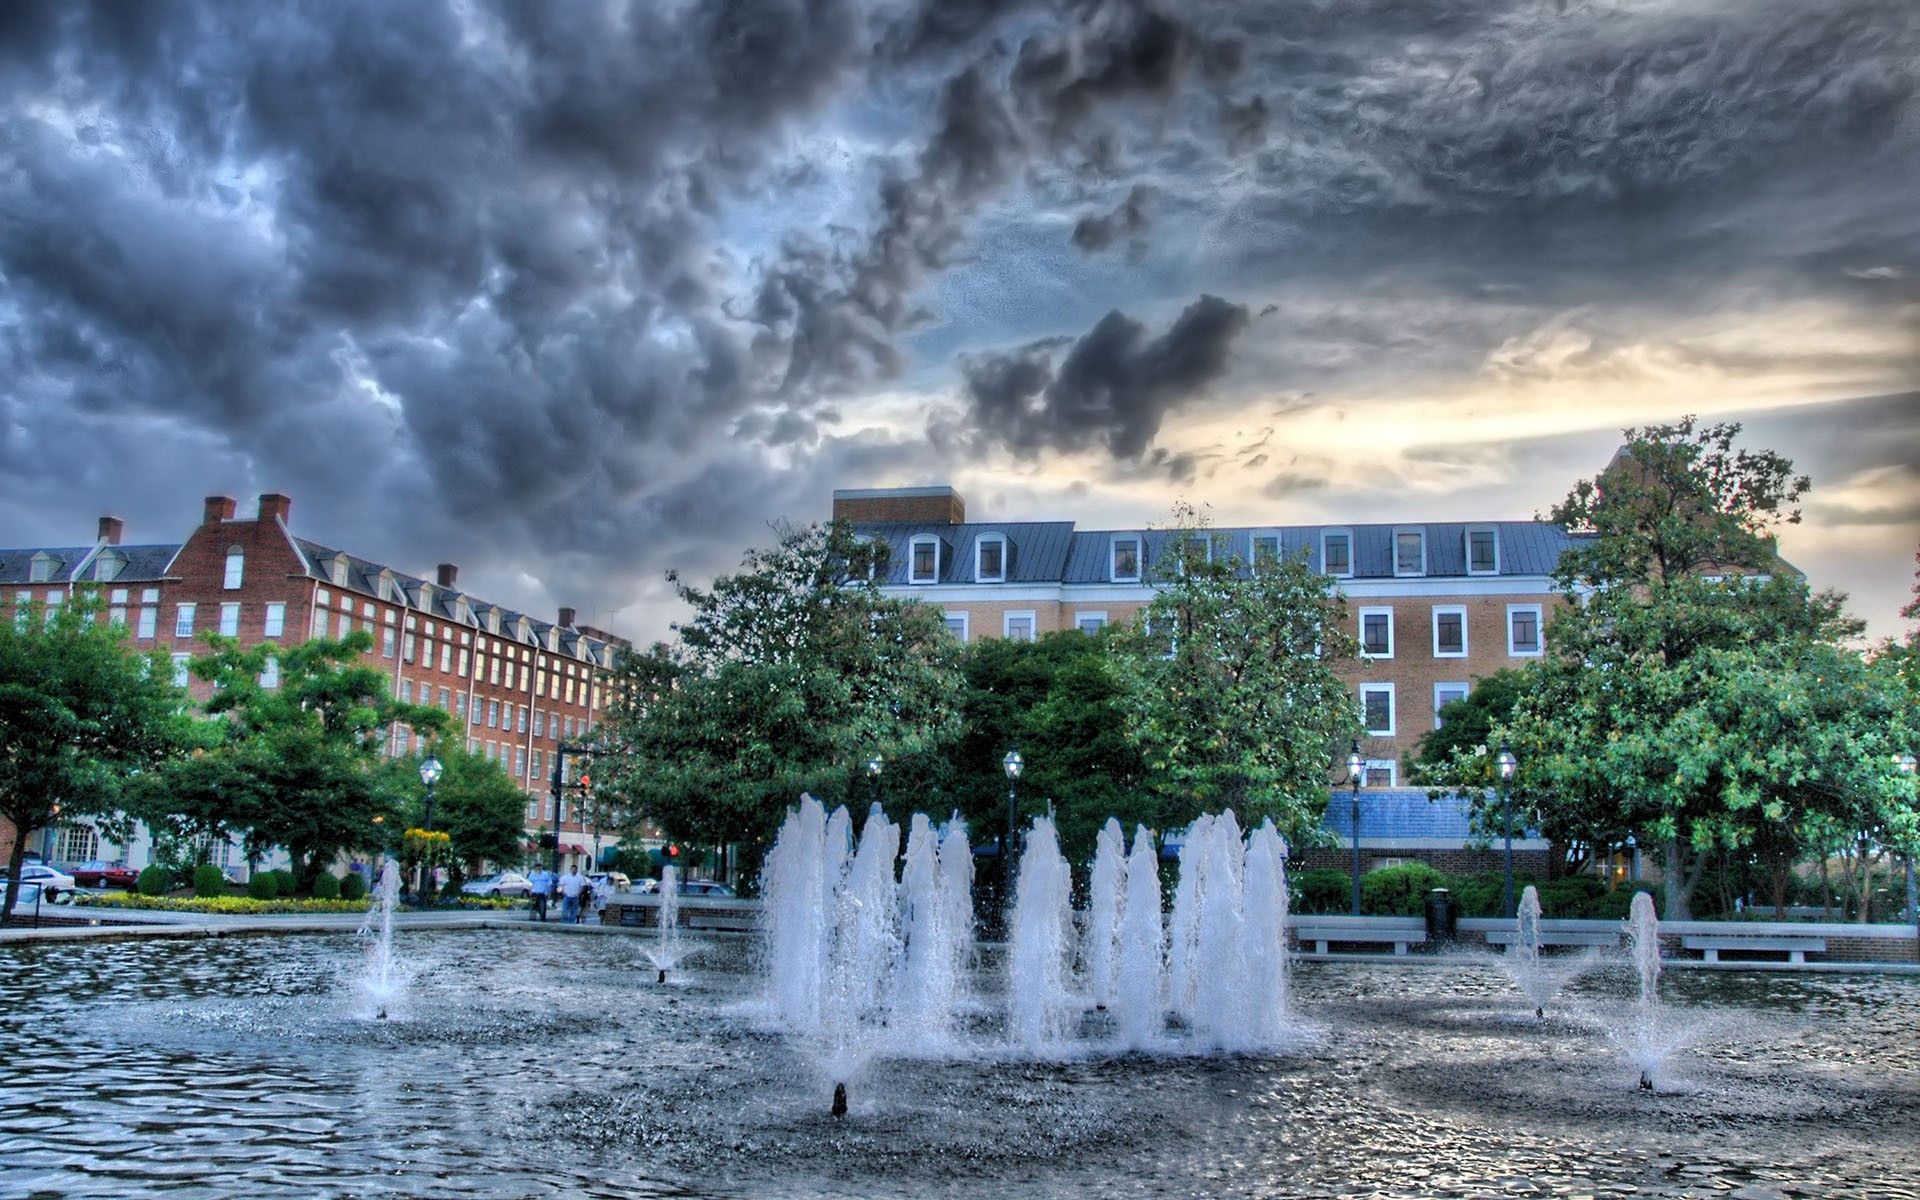 fountain, hdr, cities, water, trees, building wallpaper for mobile